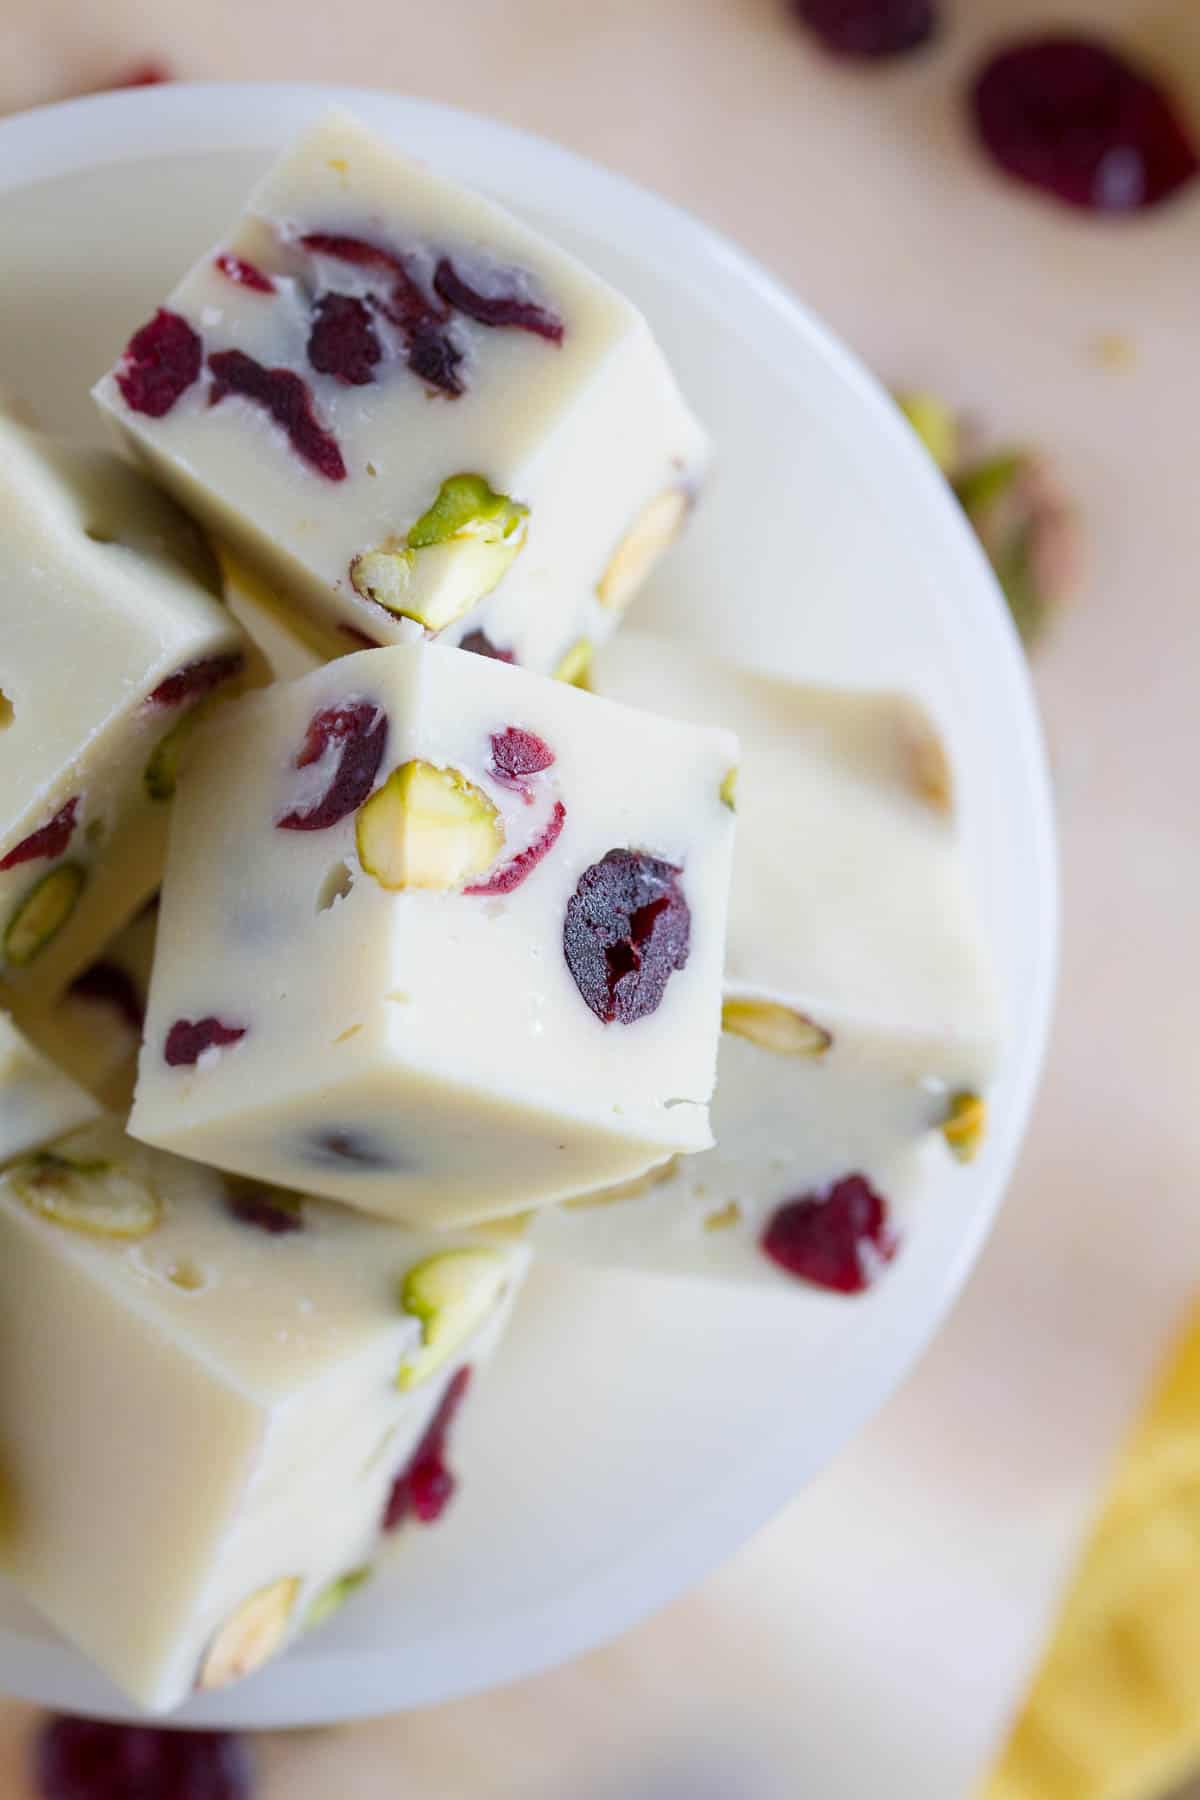 slices of cranberry pistachio fudge, showing texture and nuts and fruit.